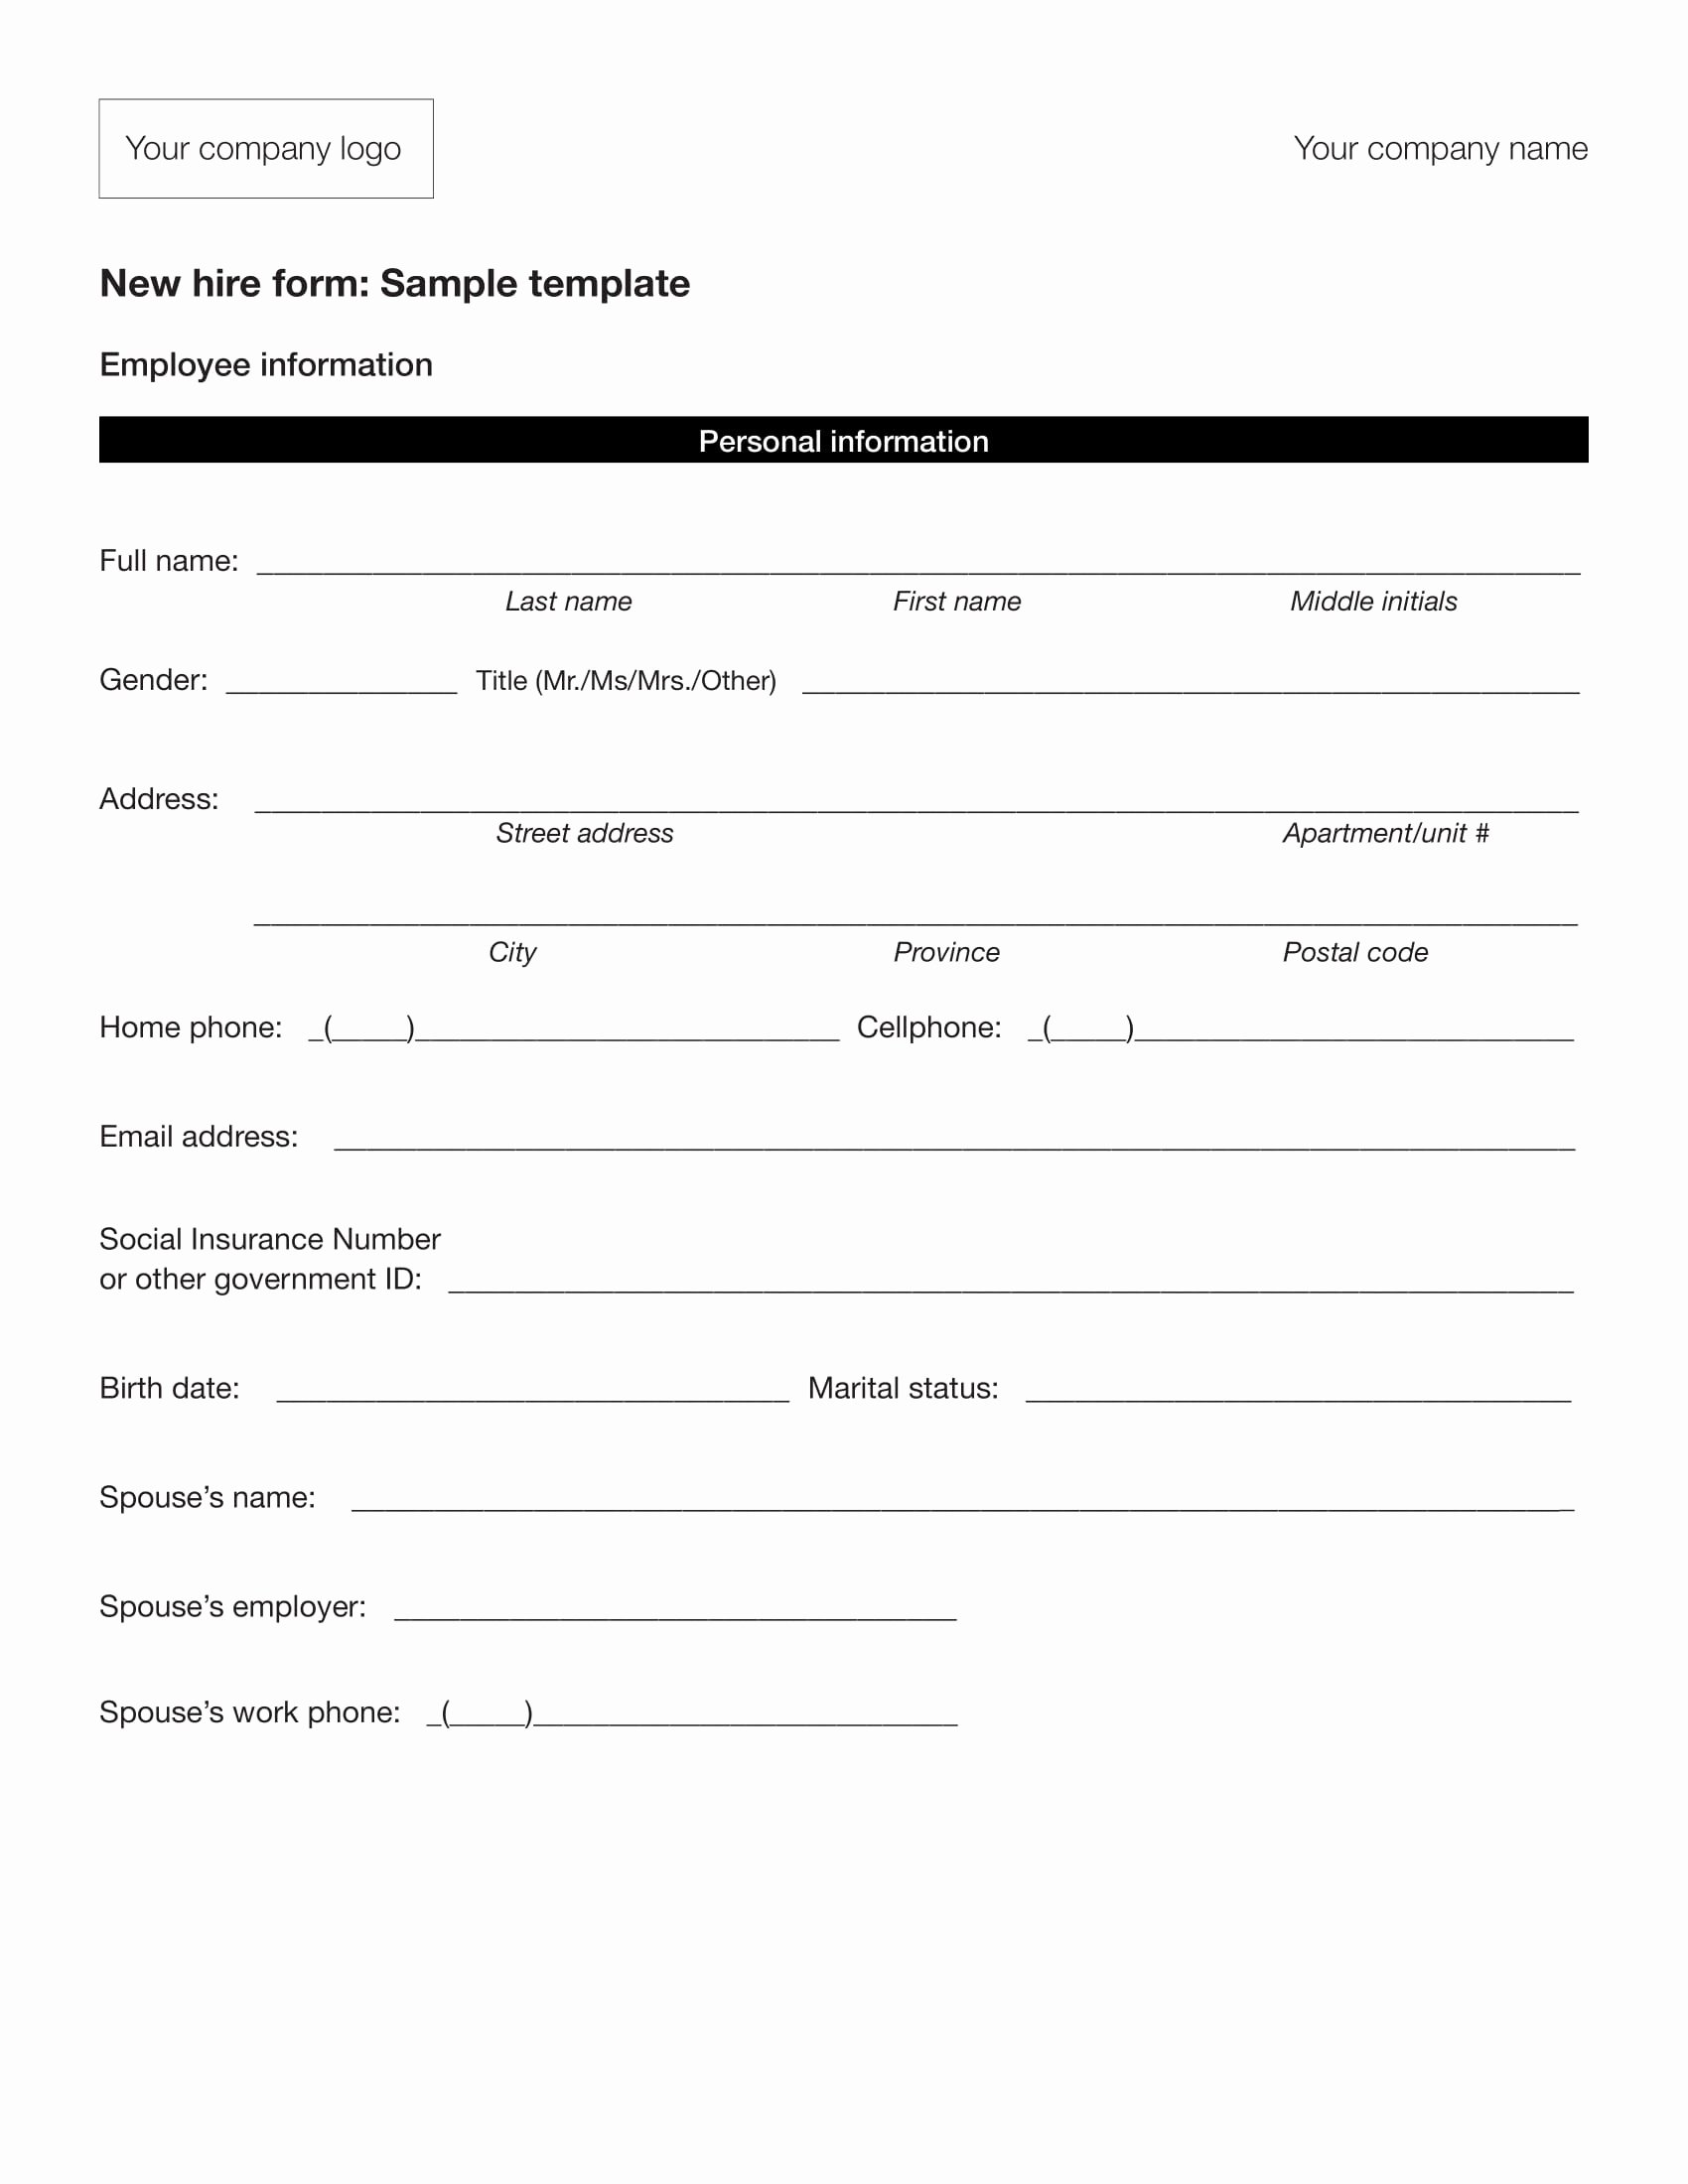 New Hire Requisition form Best Of 10 Employee Information form Examples Pdf